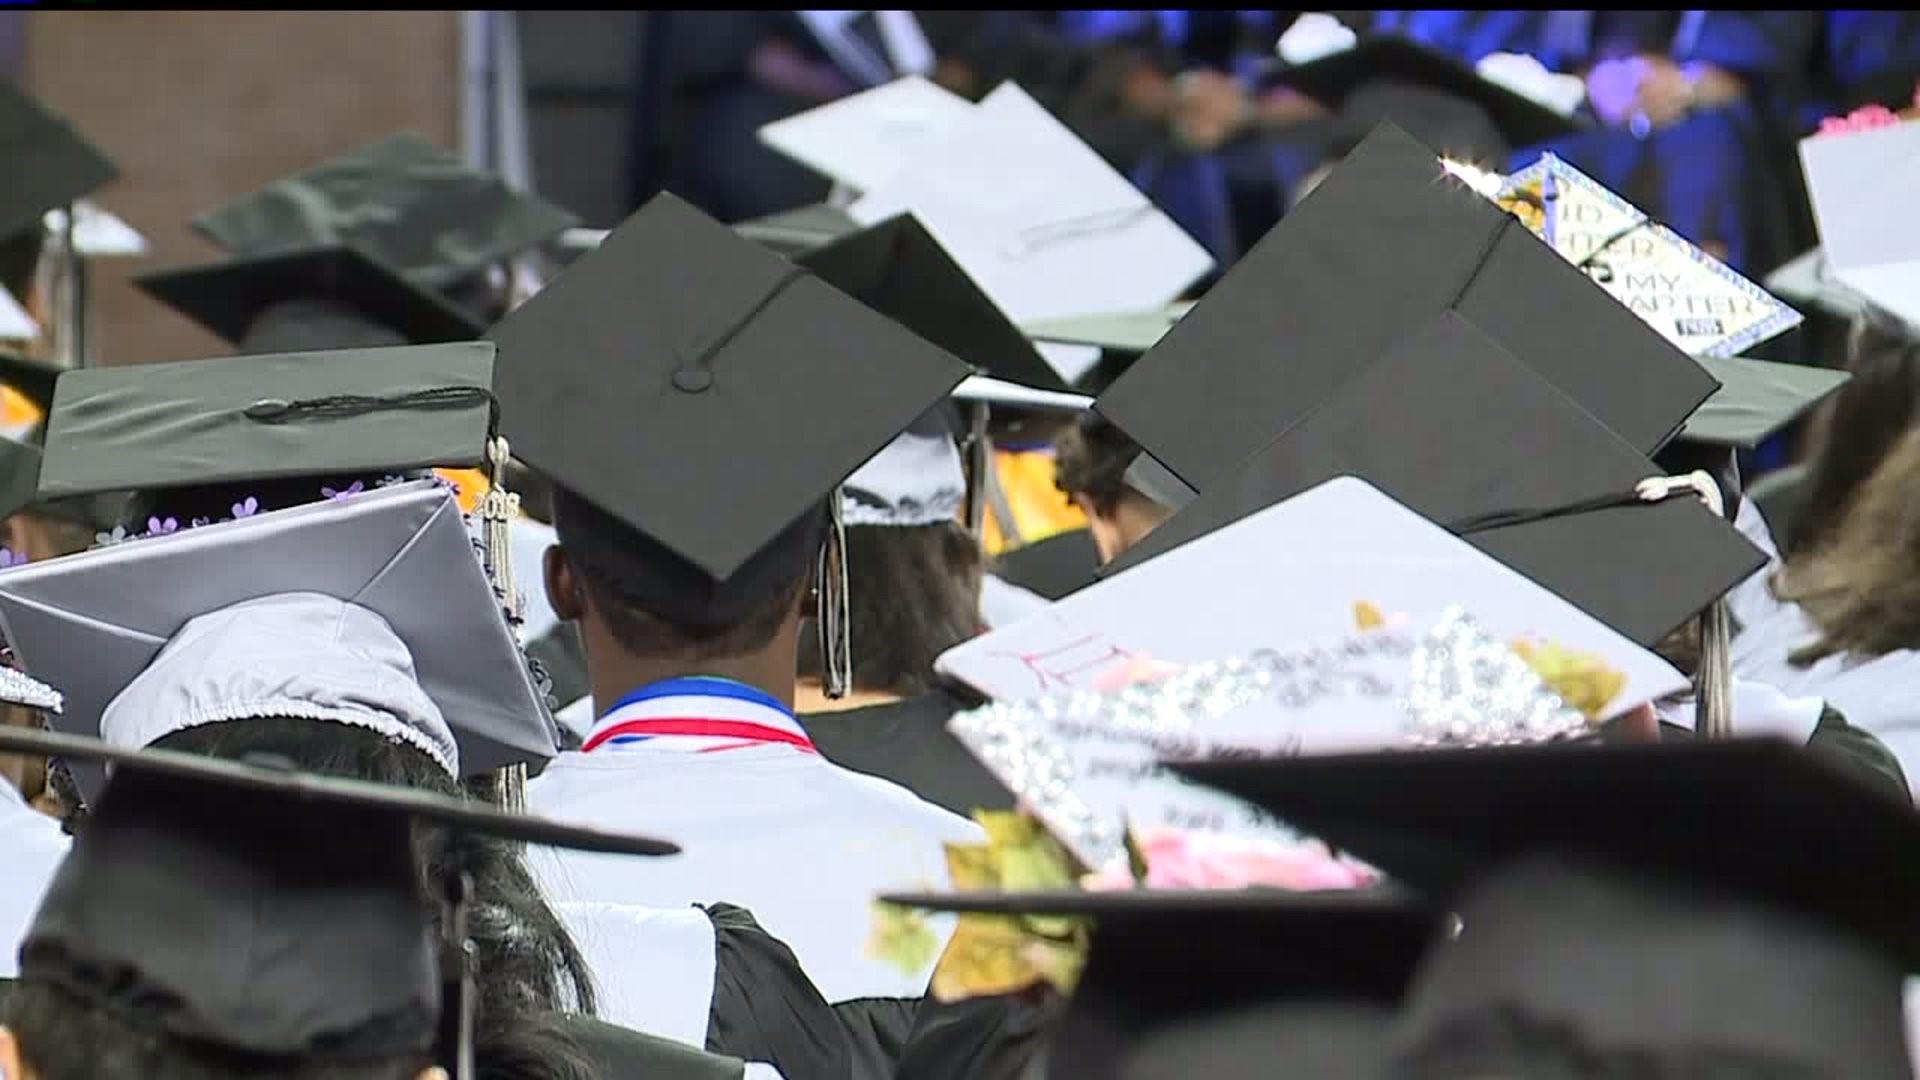 Teenager, unexpected to live past childhood, graduates high school in Dauphin County